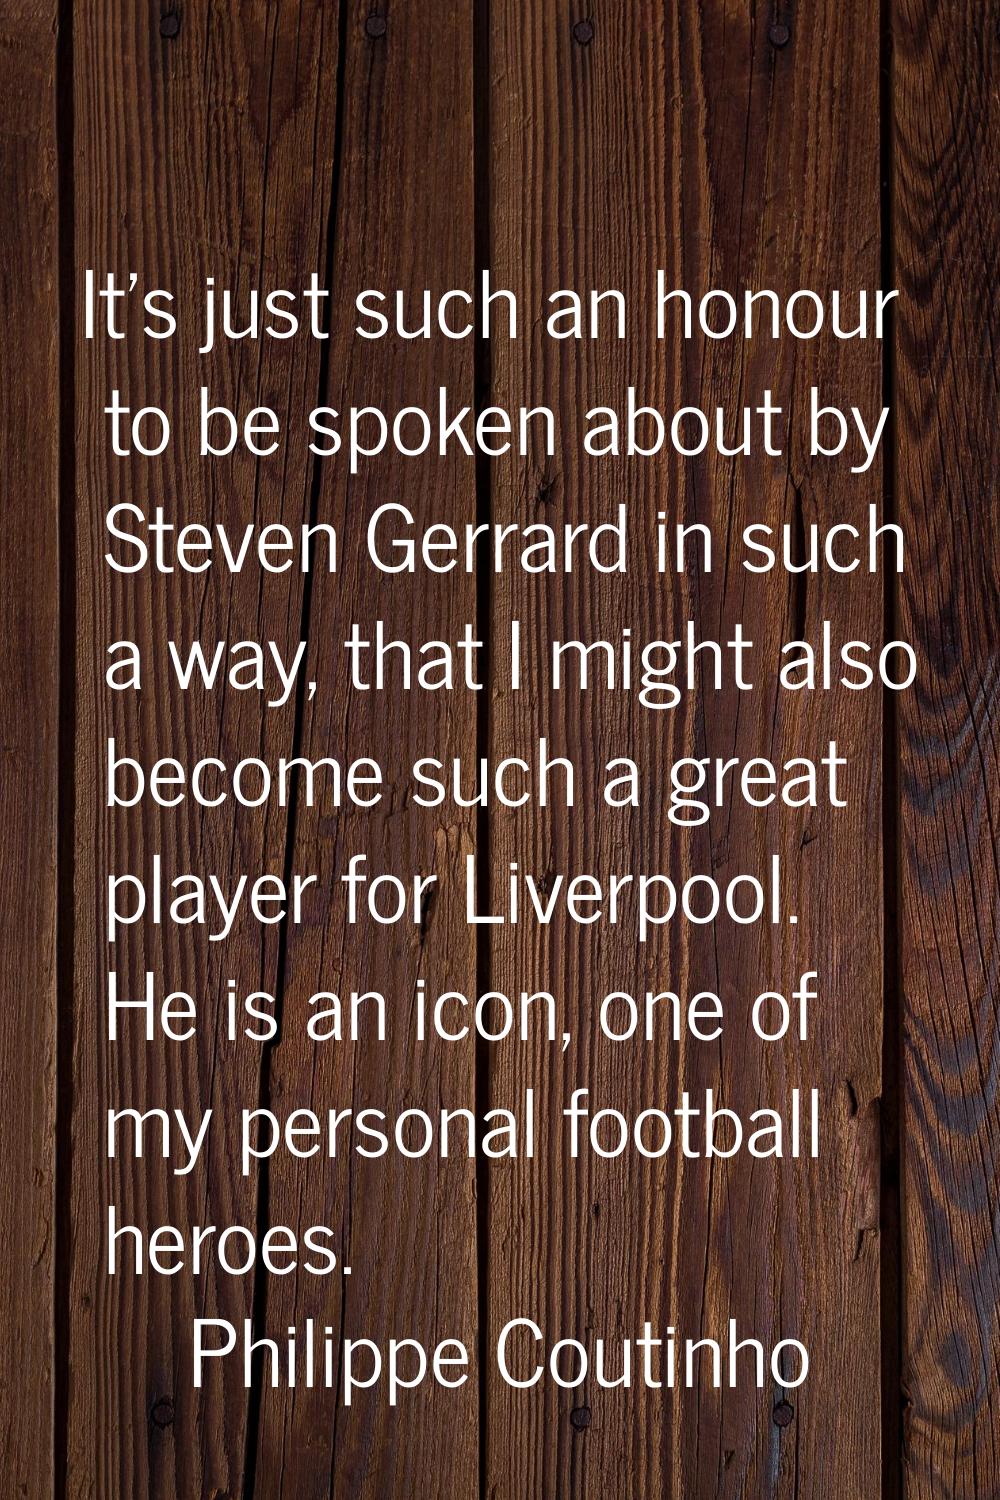 It's just such an honour to be spoken about by Steven Gerrard in such a way, that I might also beco